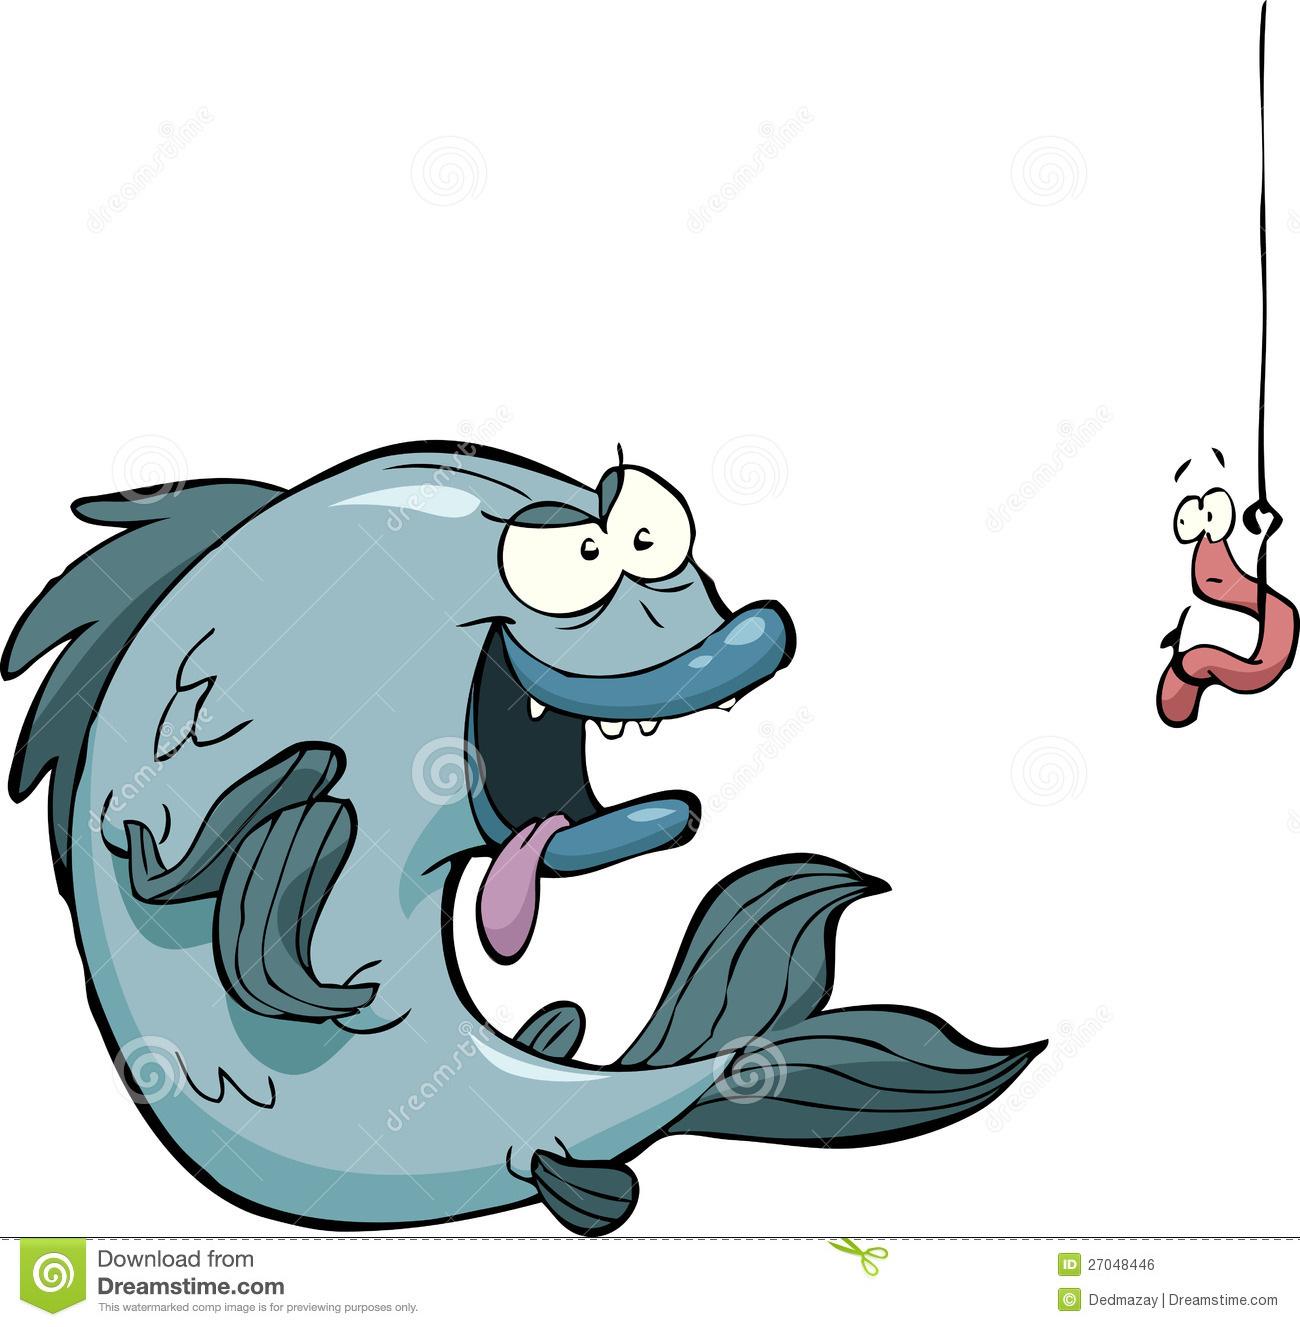 Fish And Worm Royalty Free Stock Image   Image  27048446